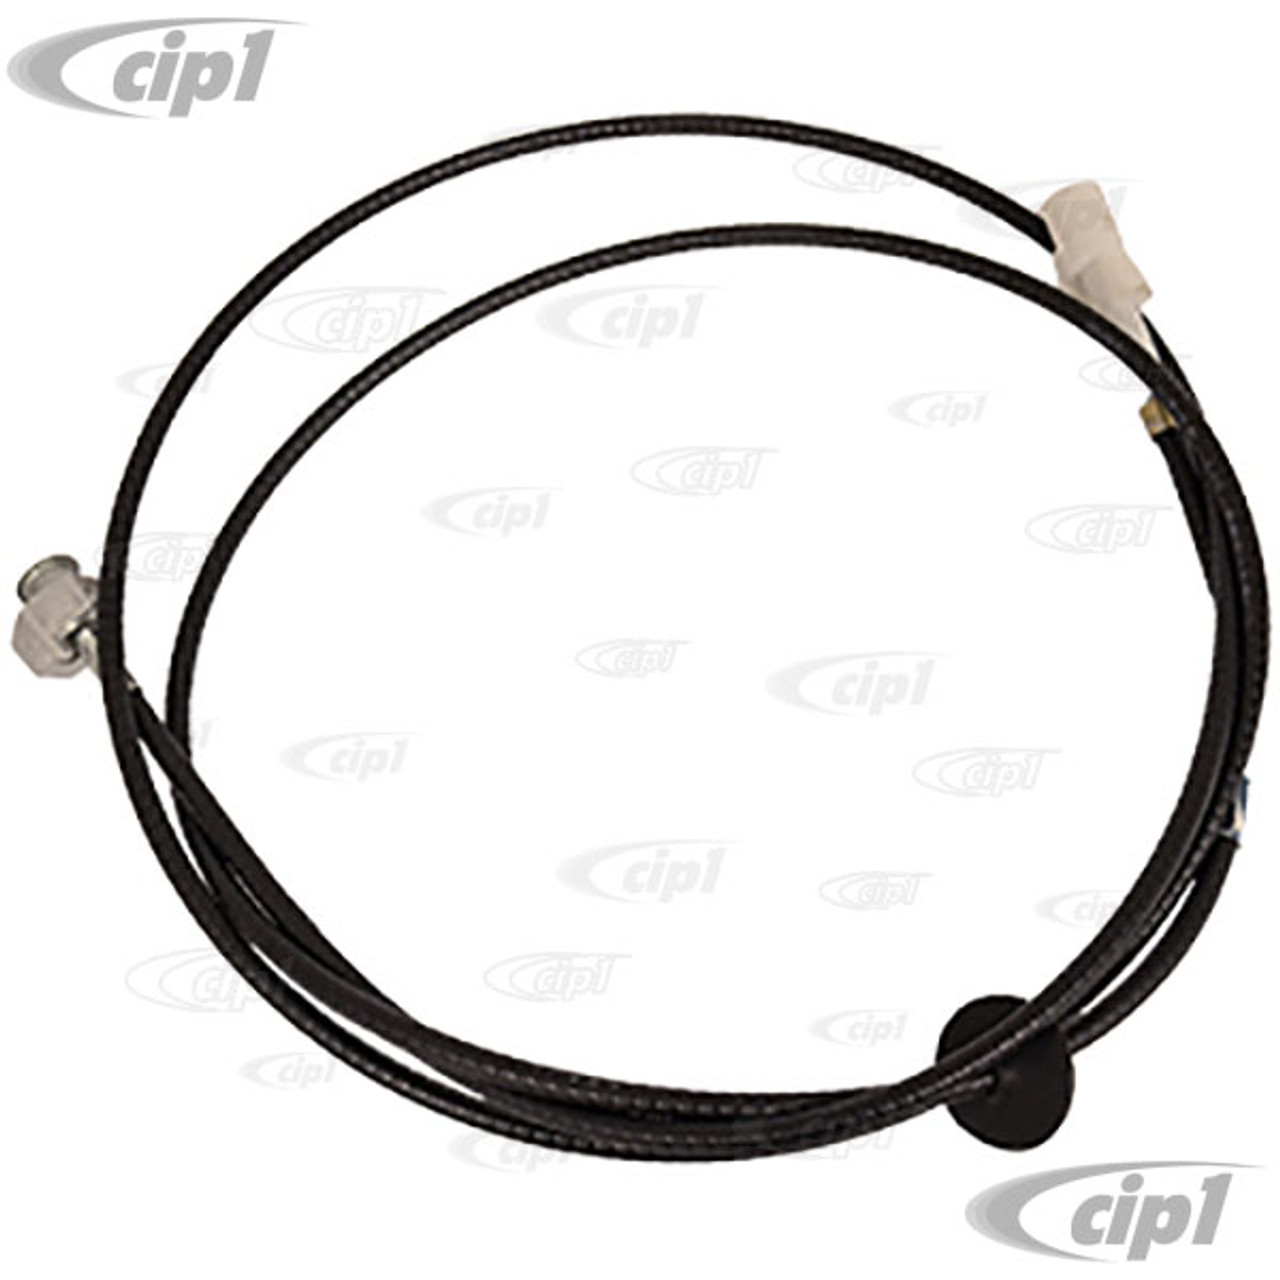 VWC-251-957-809-J - 251957809j - GERMAN - SPEEDOMETER CABLE - 2460MM ONE  PIECE - DIRECT FROM SPEEDO TO TRANSAXLE - (BYPASSES EGR BOX) - VANAGON  SYNCRO 